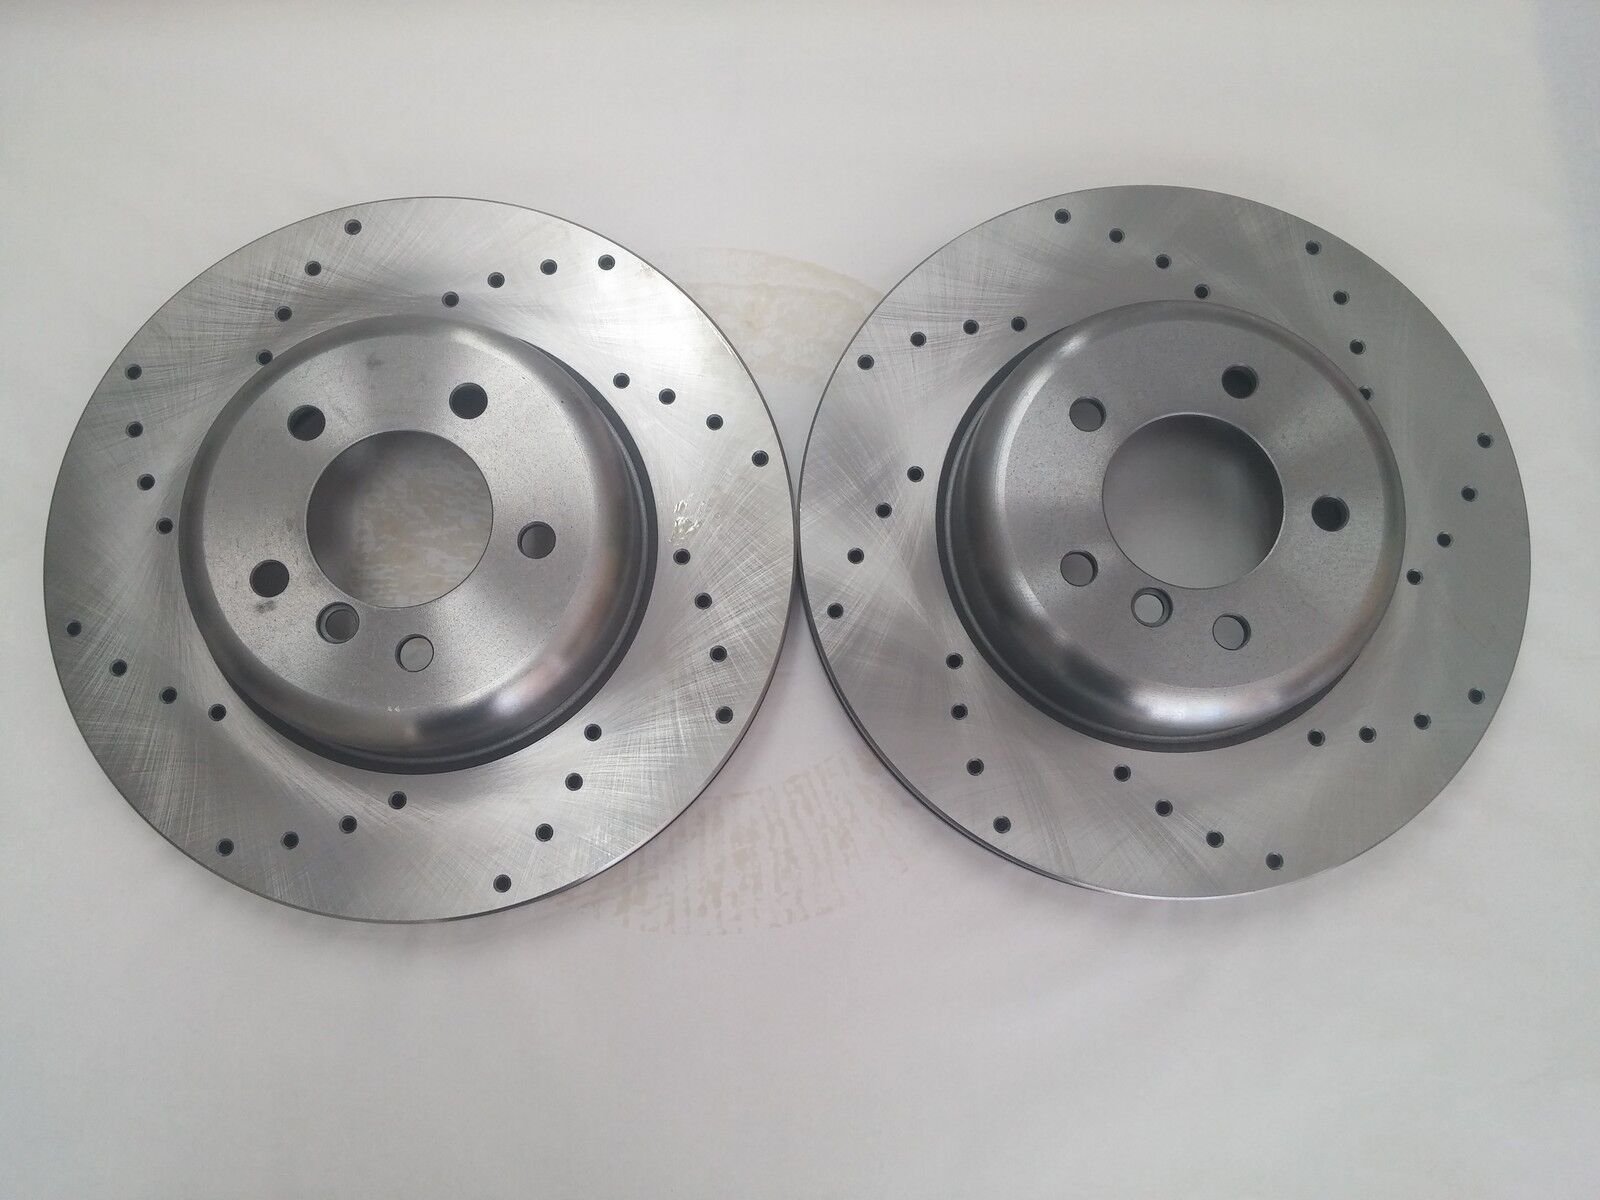 Front Brake Rotors For BMW 535i 2008 to 2010, 550i 2006 to 2010, 650i 2006 2008